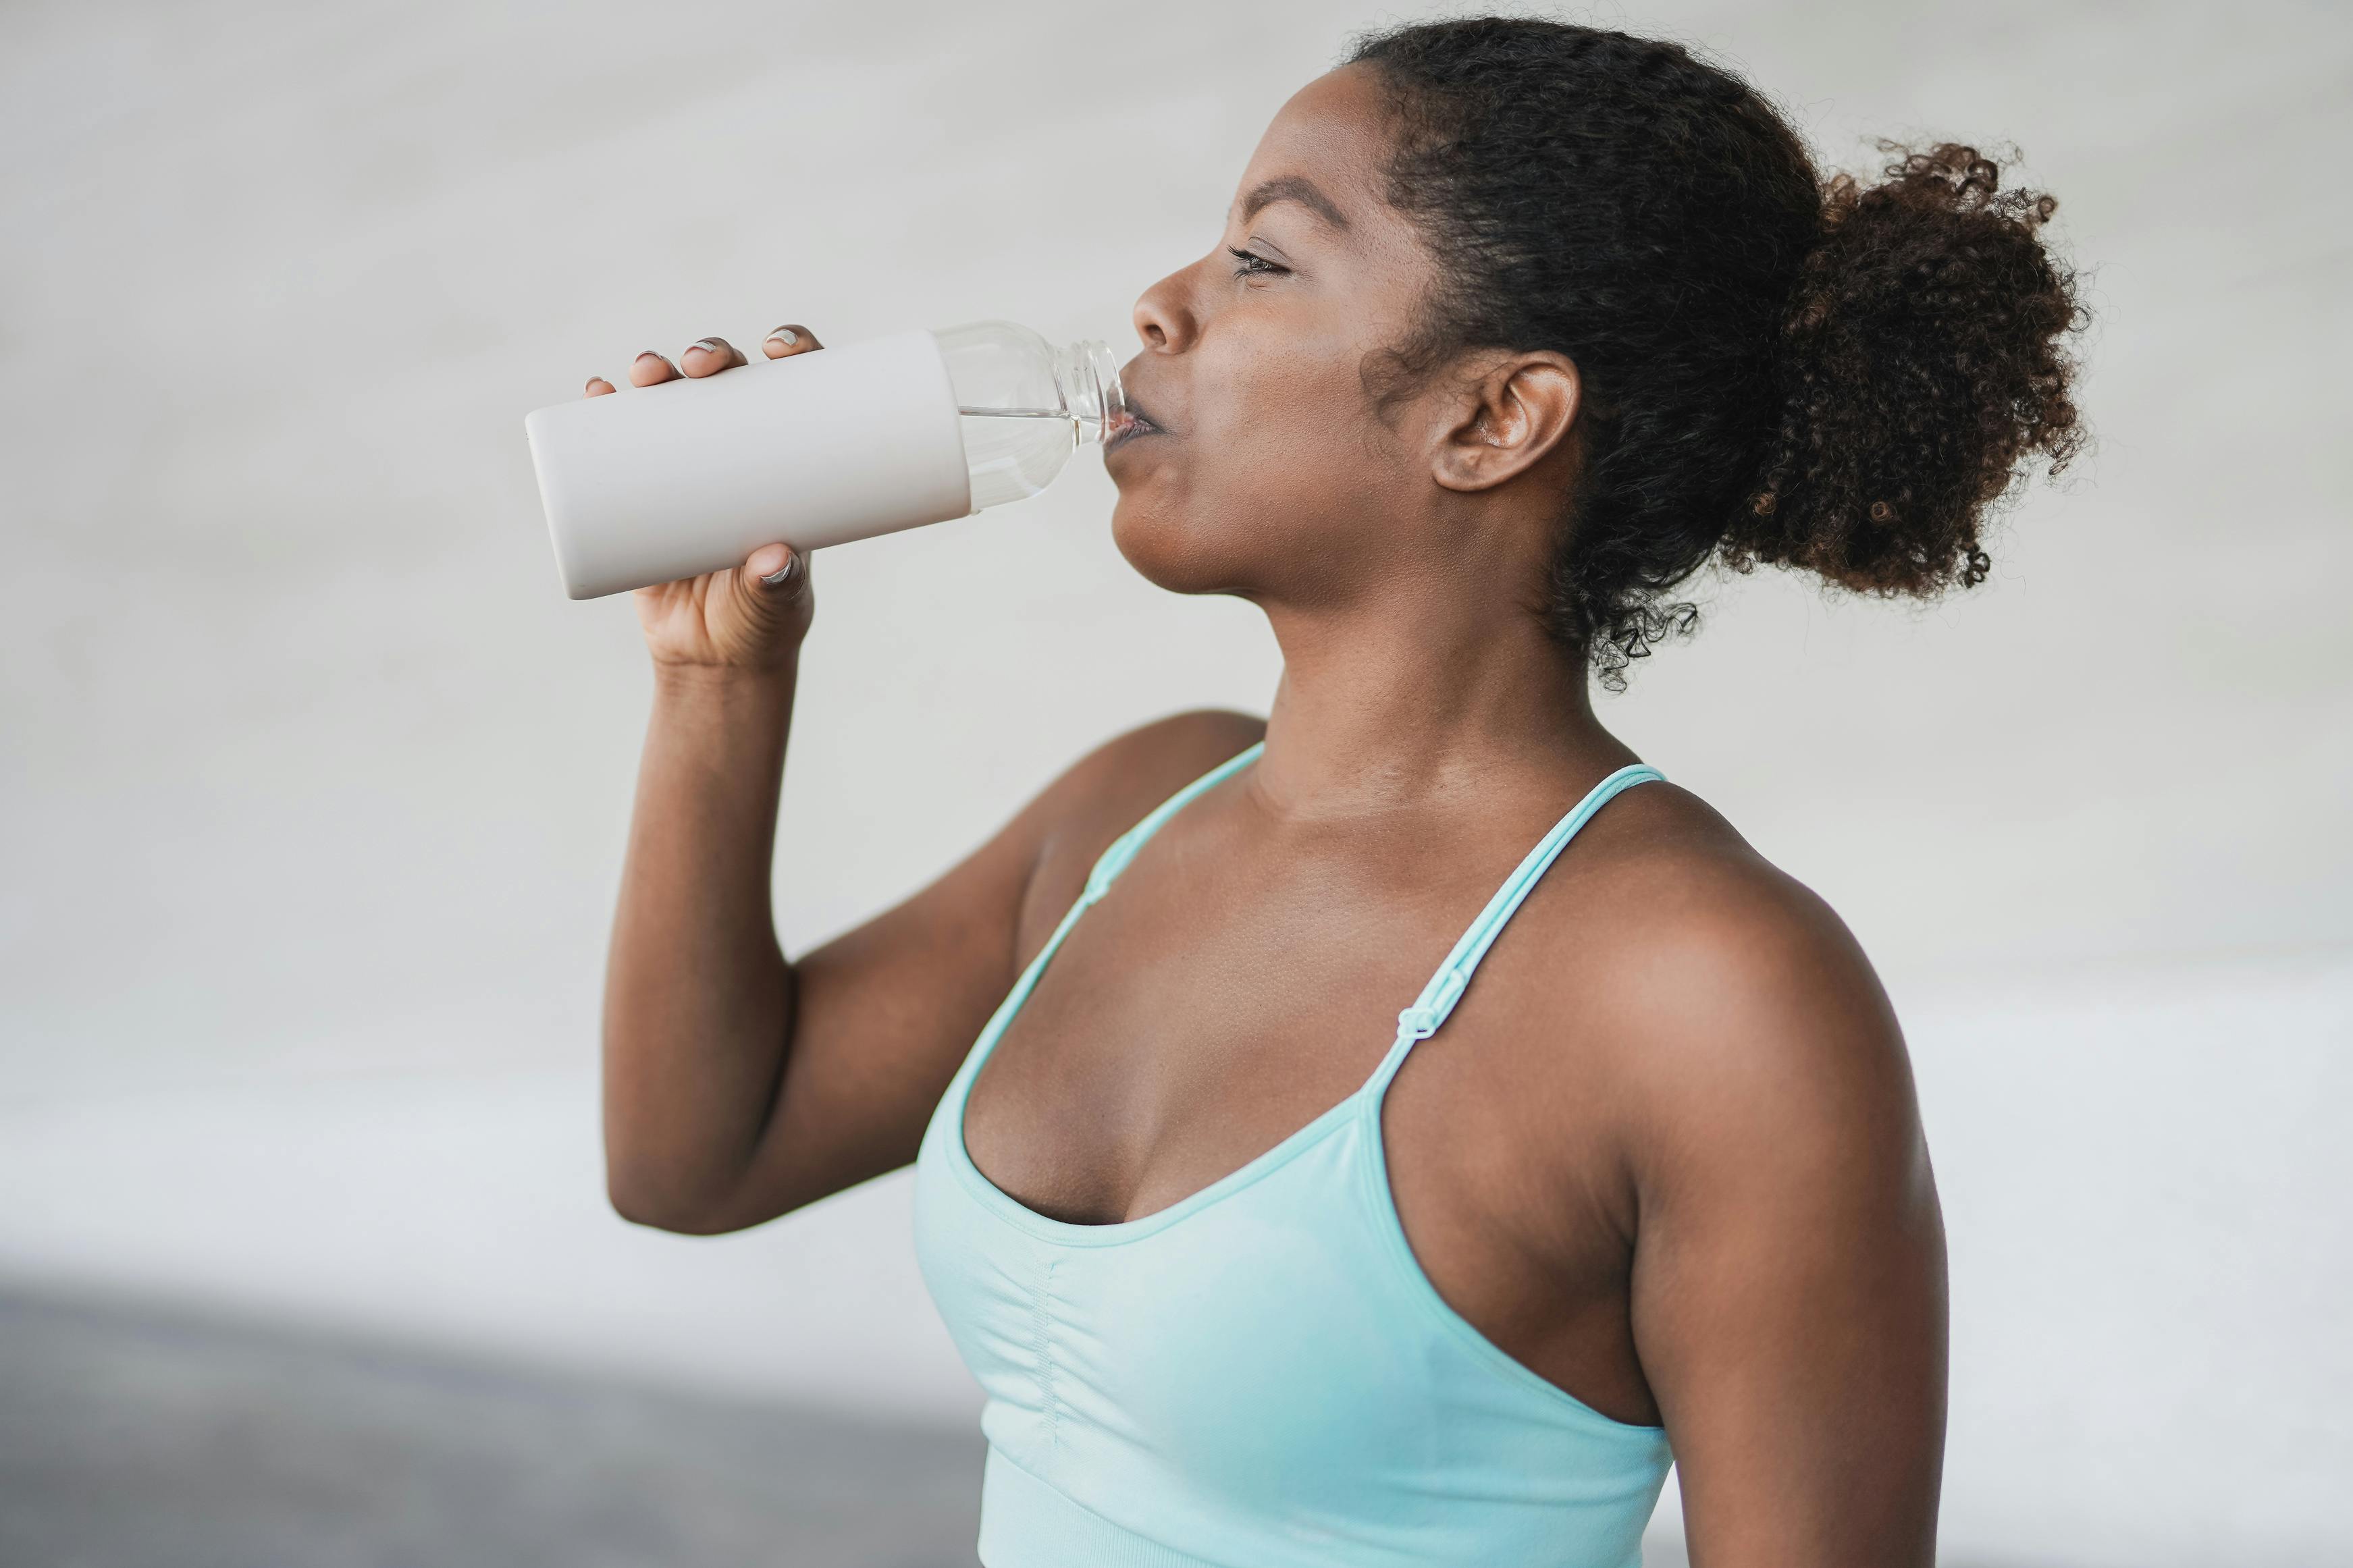 Quench Your Thirst for Peak Performance